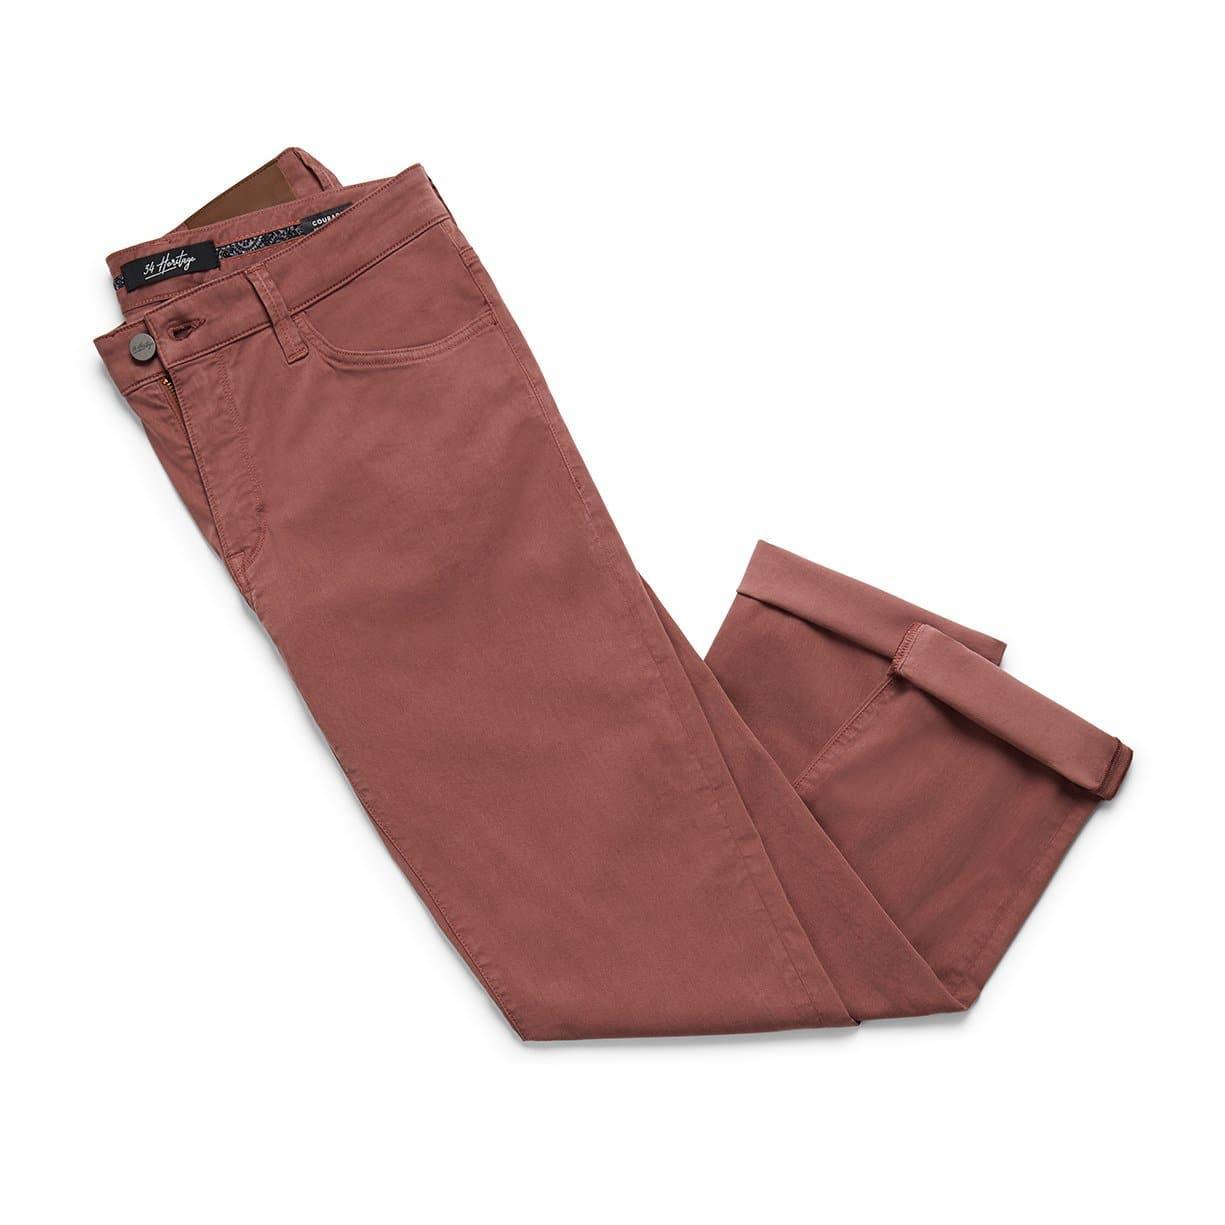 Laflamme- Jeans Courage Berry Twill - 34 Heritage